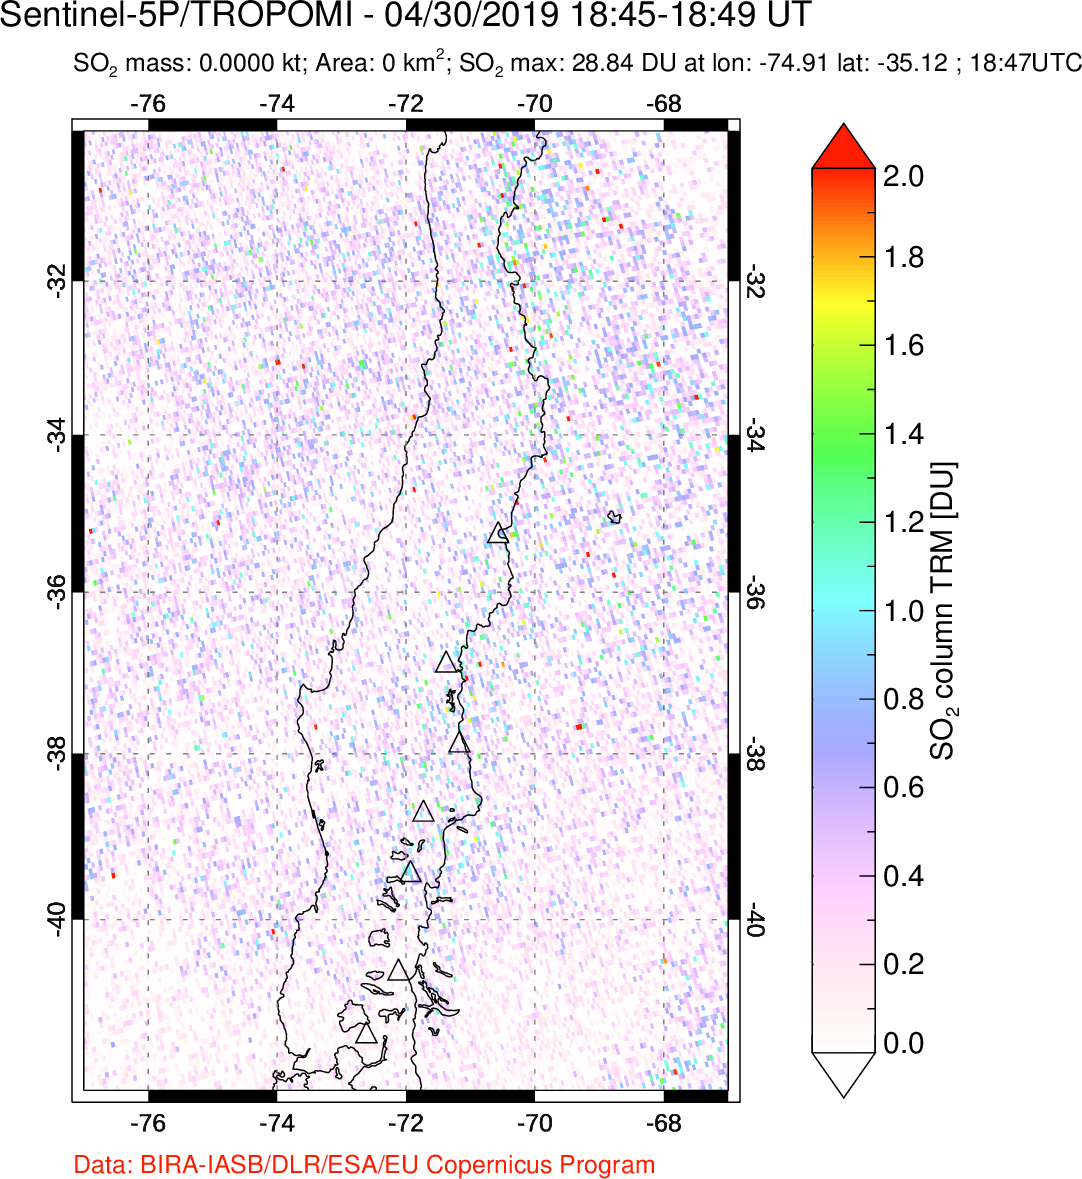 A sulfur dioxide image over Central Chile on Apr 30, 2019.